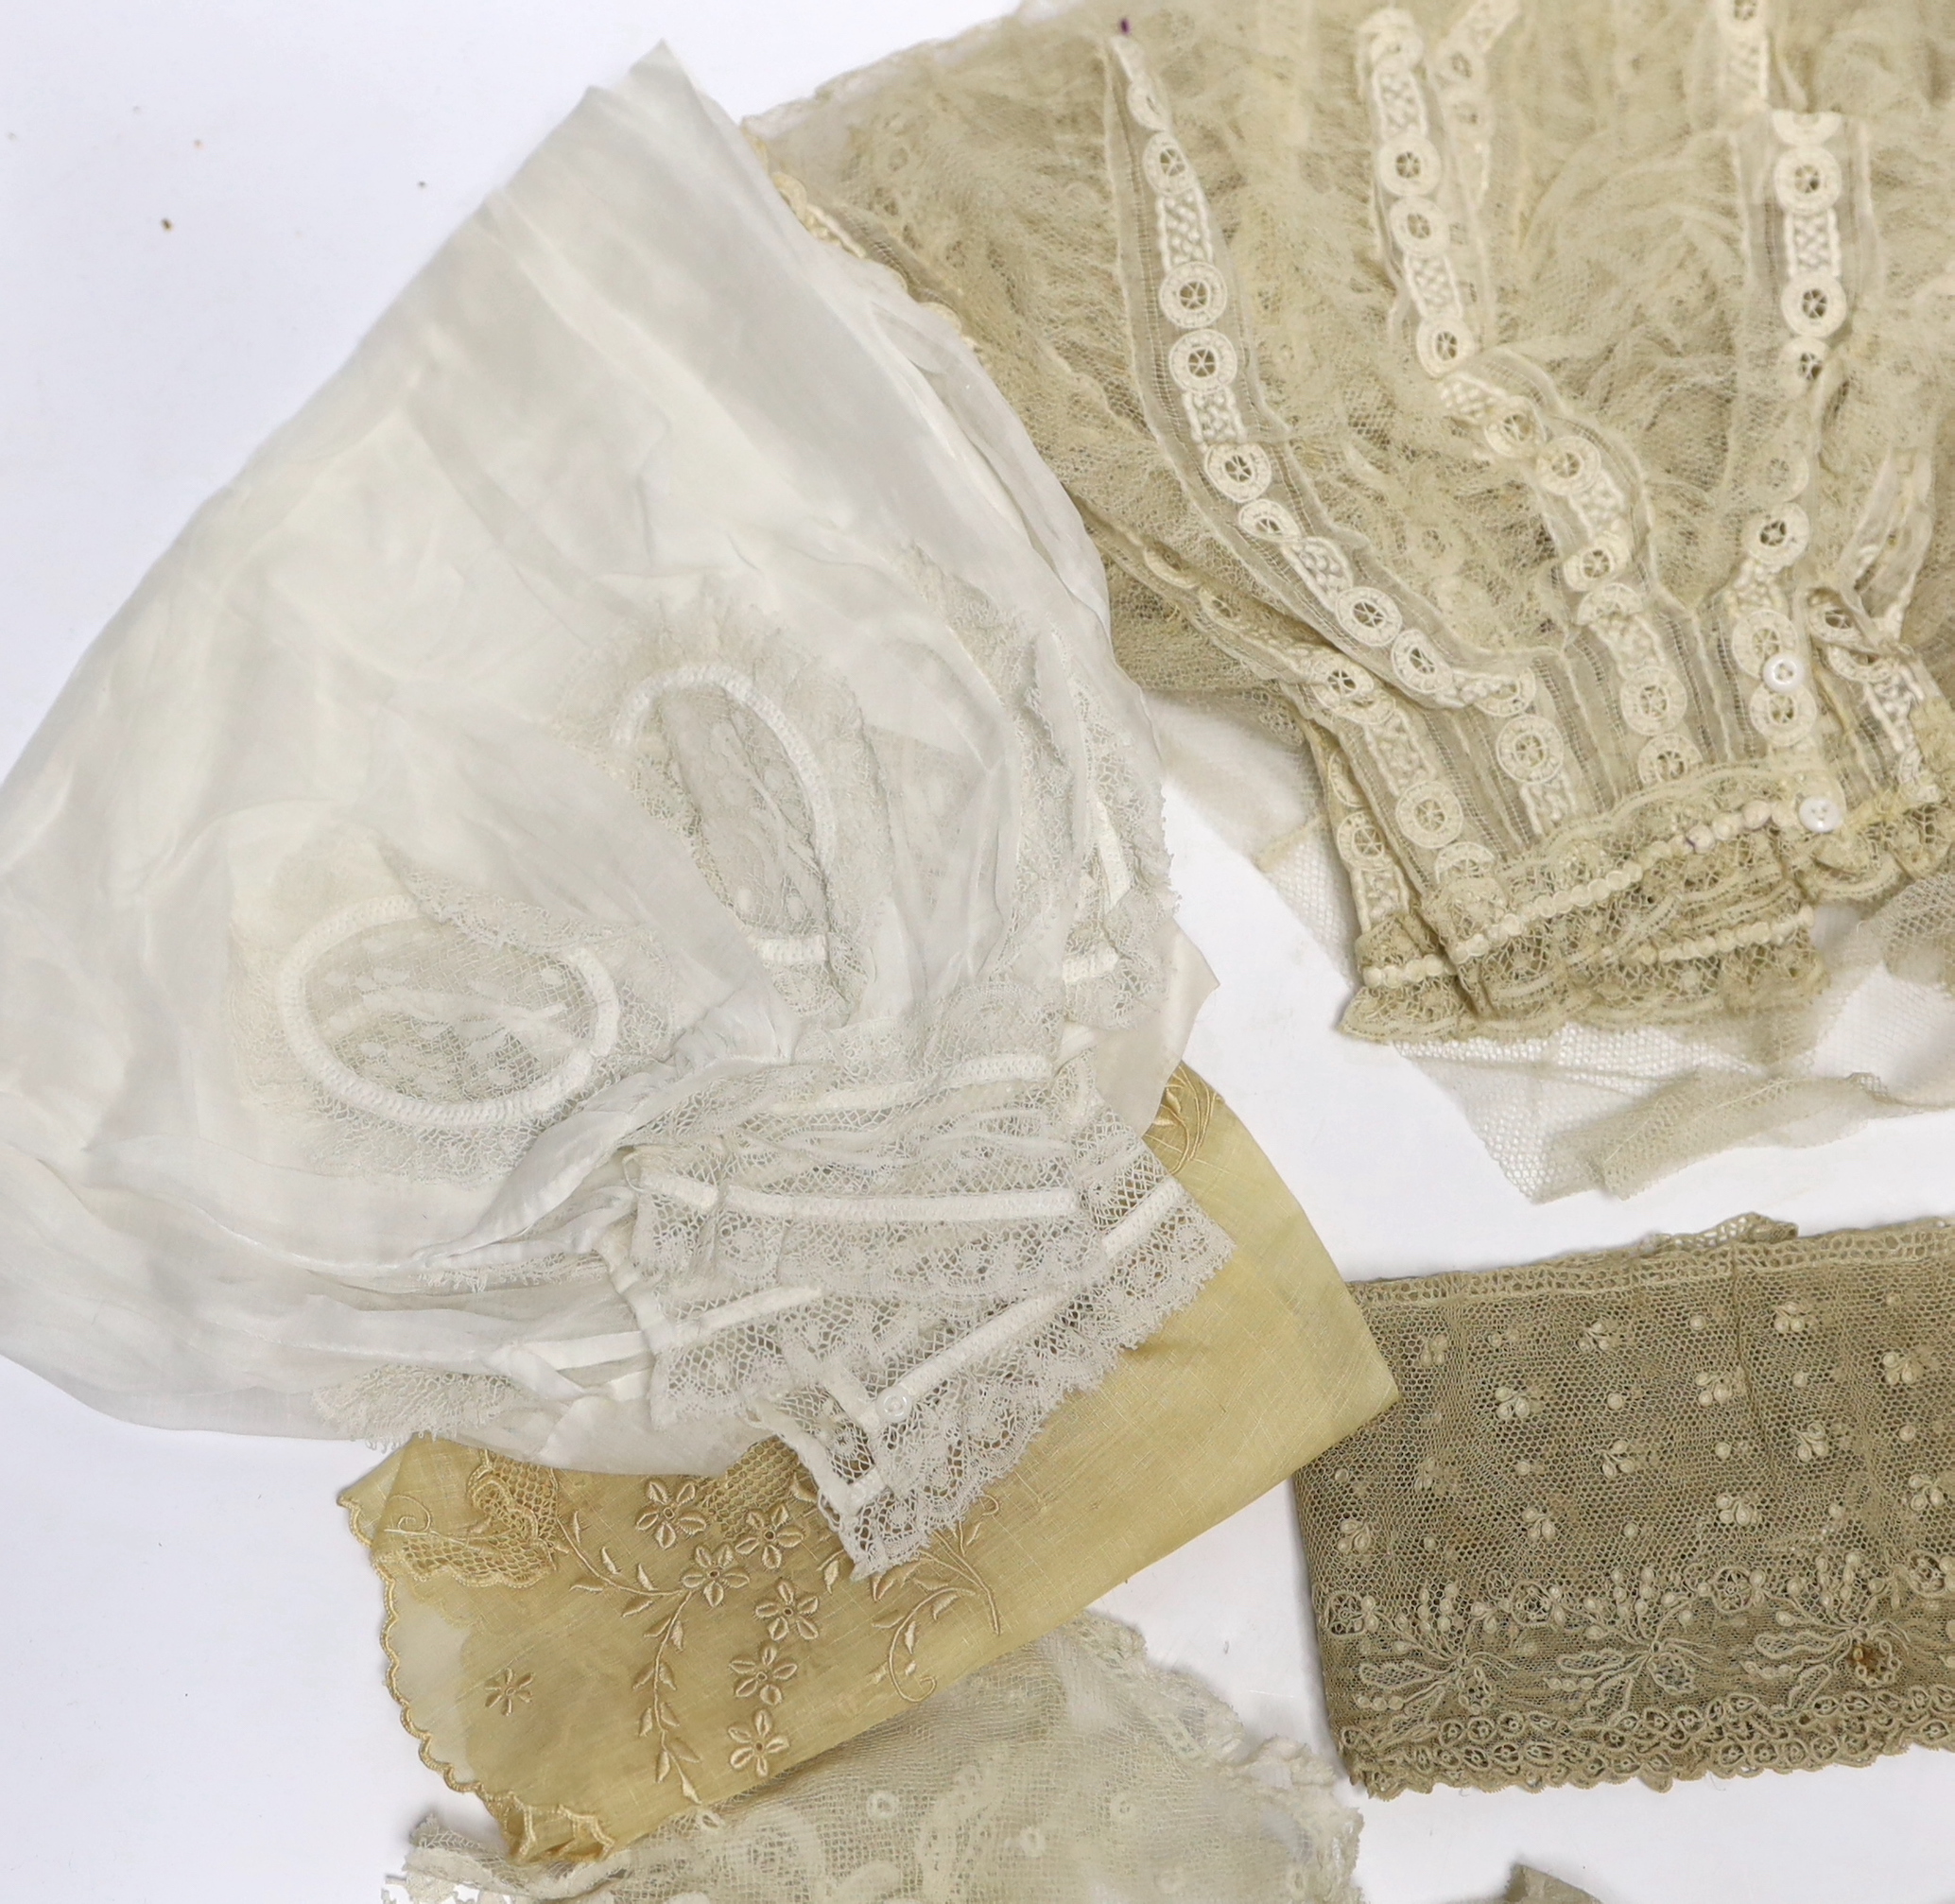 A collection of mostly 19th century French and English needle and bobbin lace trimmings, white worked sleeves, a black silk stole and black lace trimmings etc